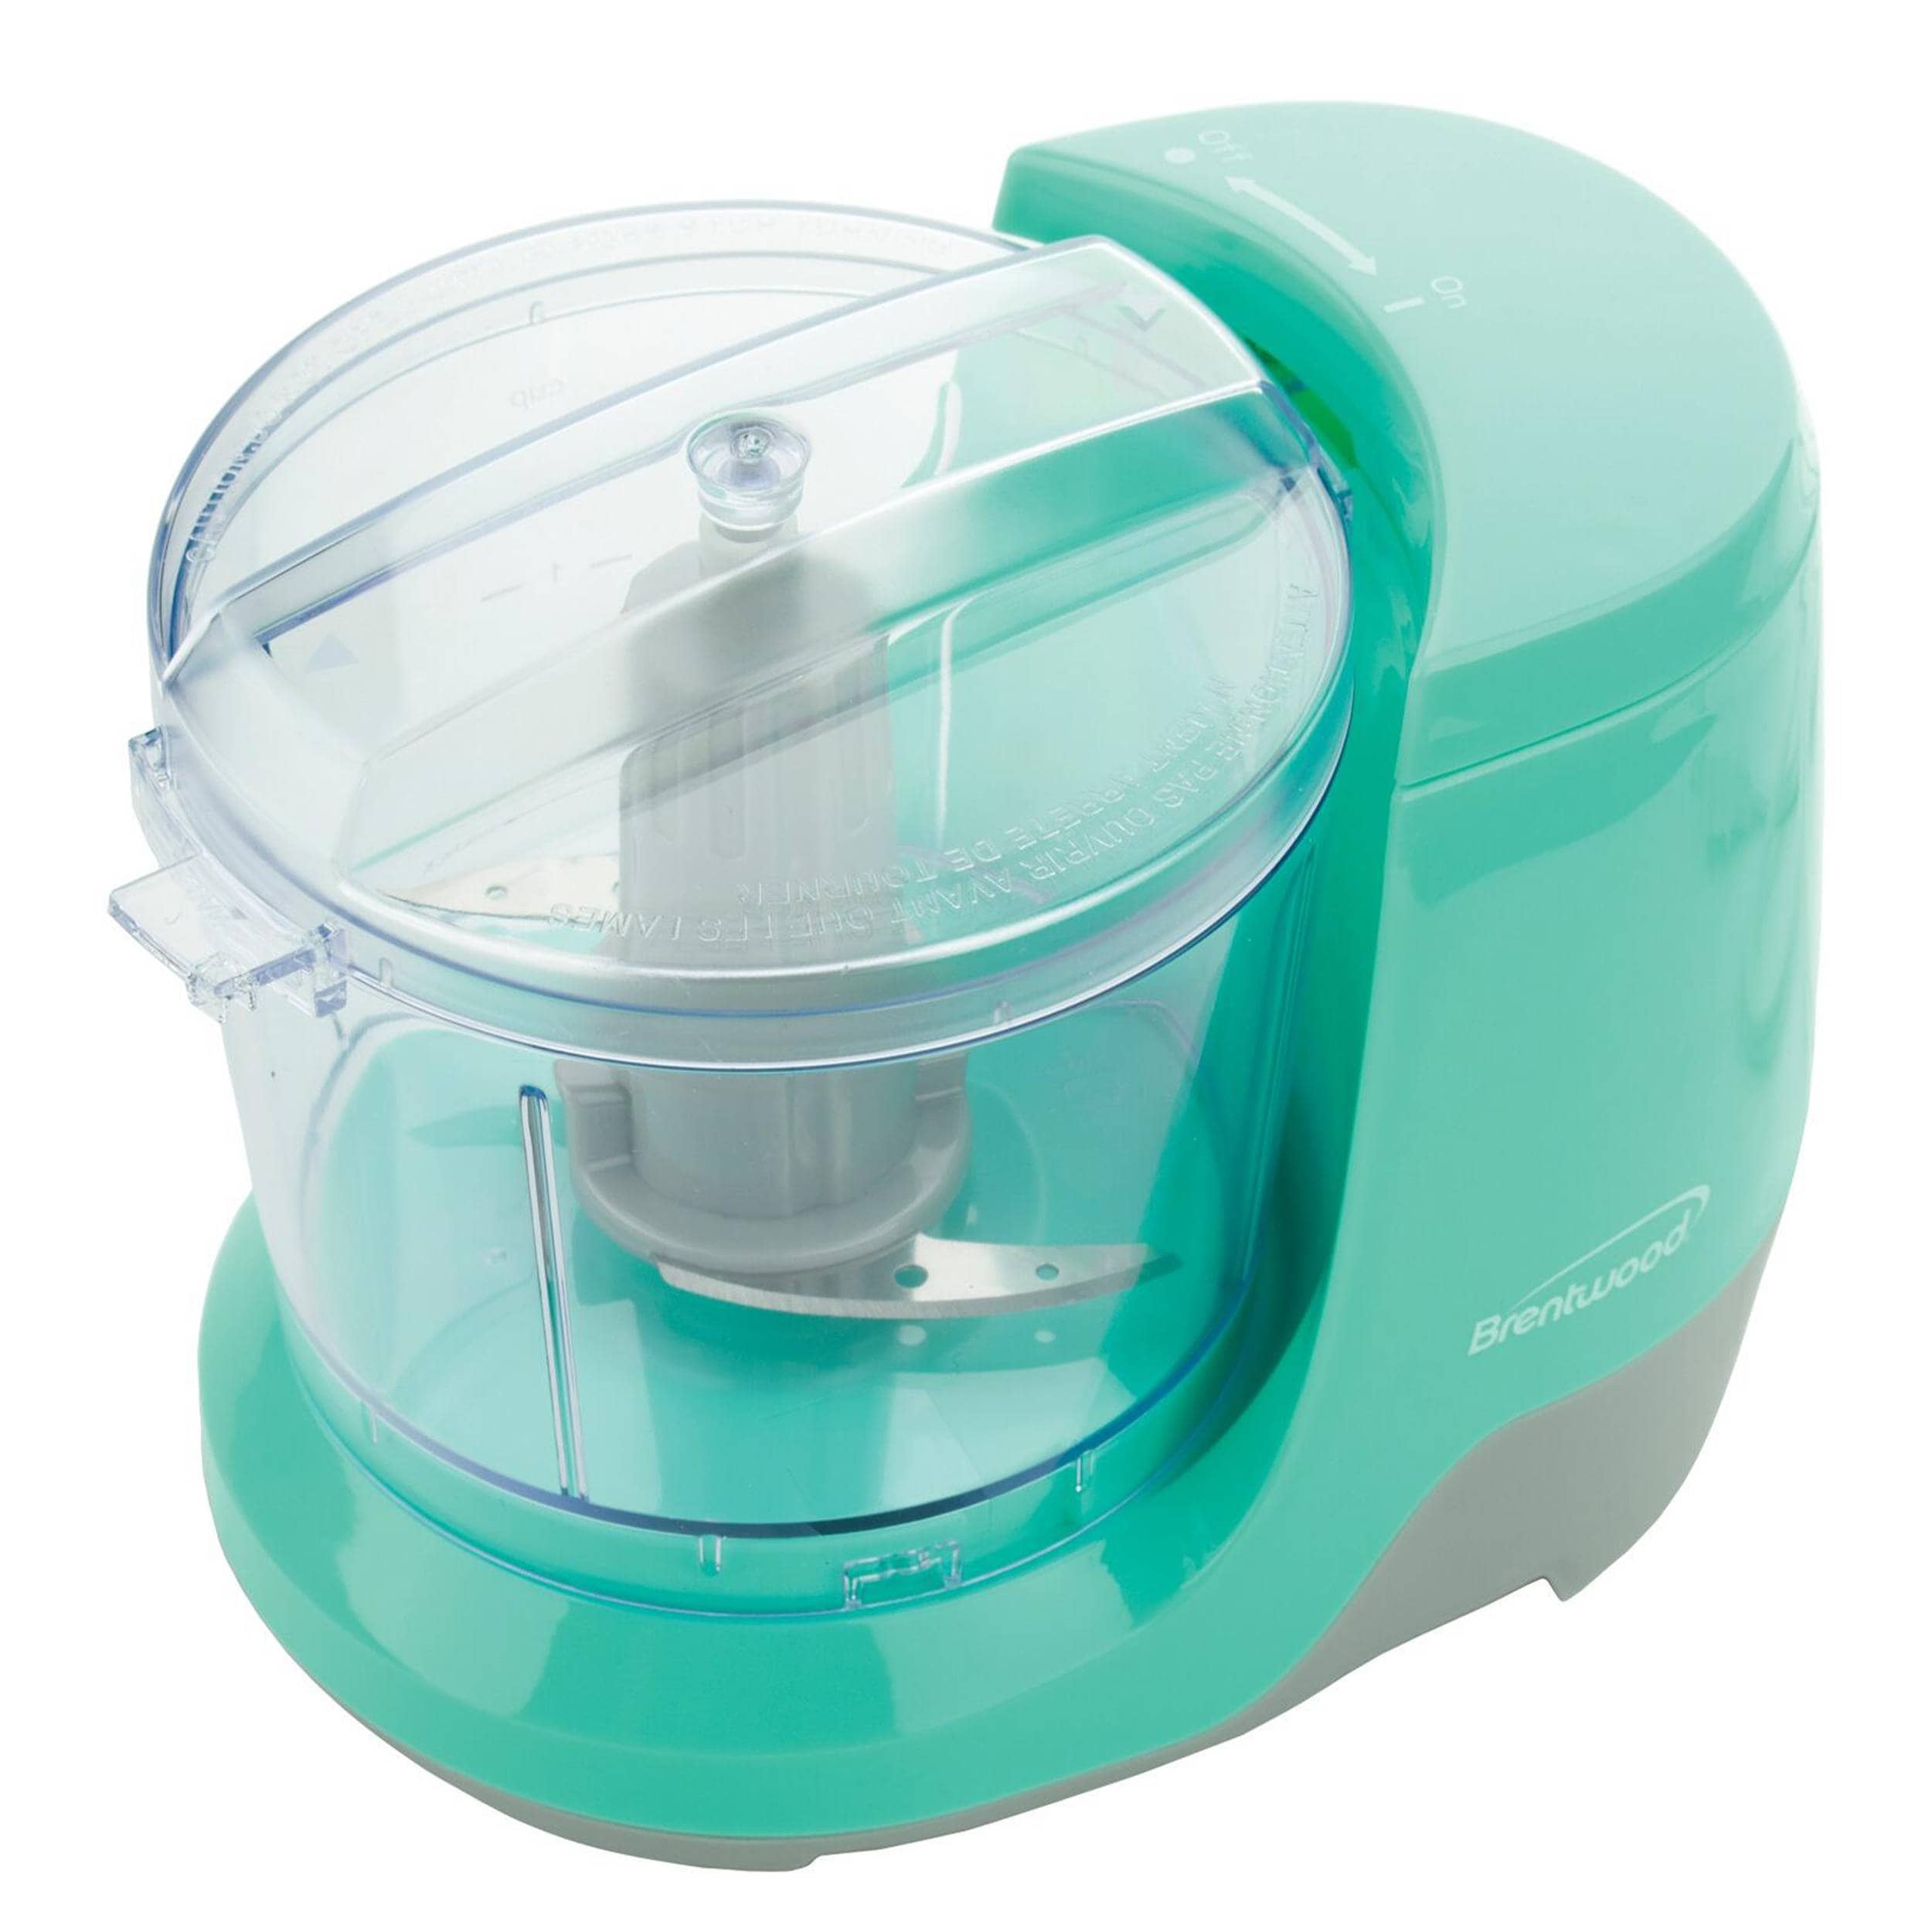  Food Processor - Cordless Mini Food Chopper Electric 200-Watt  Small Food Processor & Vegetable Chopper 2.5 Cup 20 Oz Glass Bowl with  Scraper for Blending, Mincing and Meal Preparation: Home & Kitchen